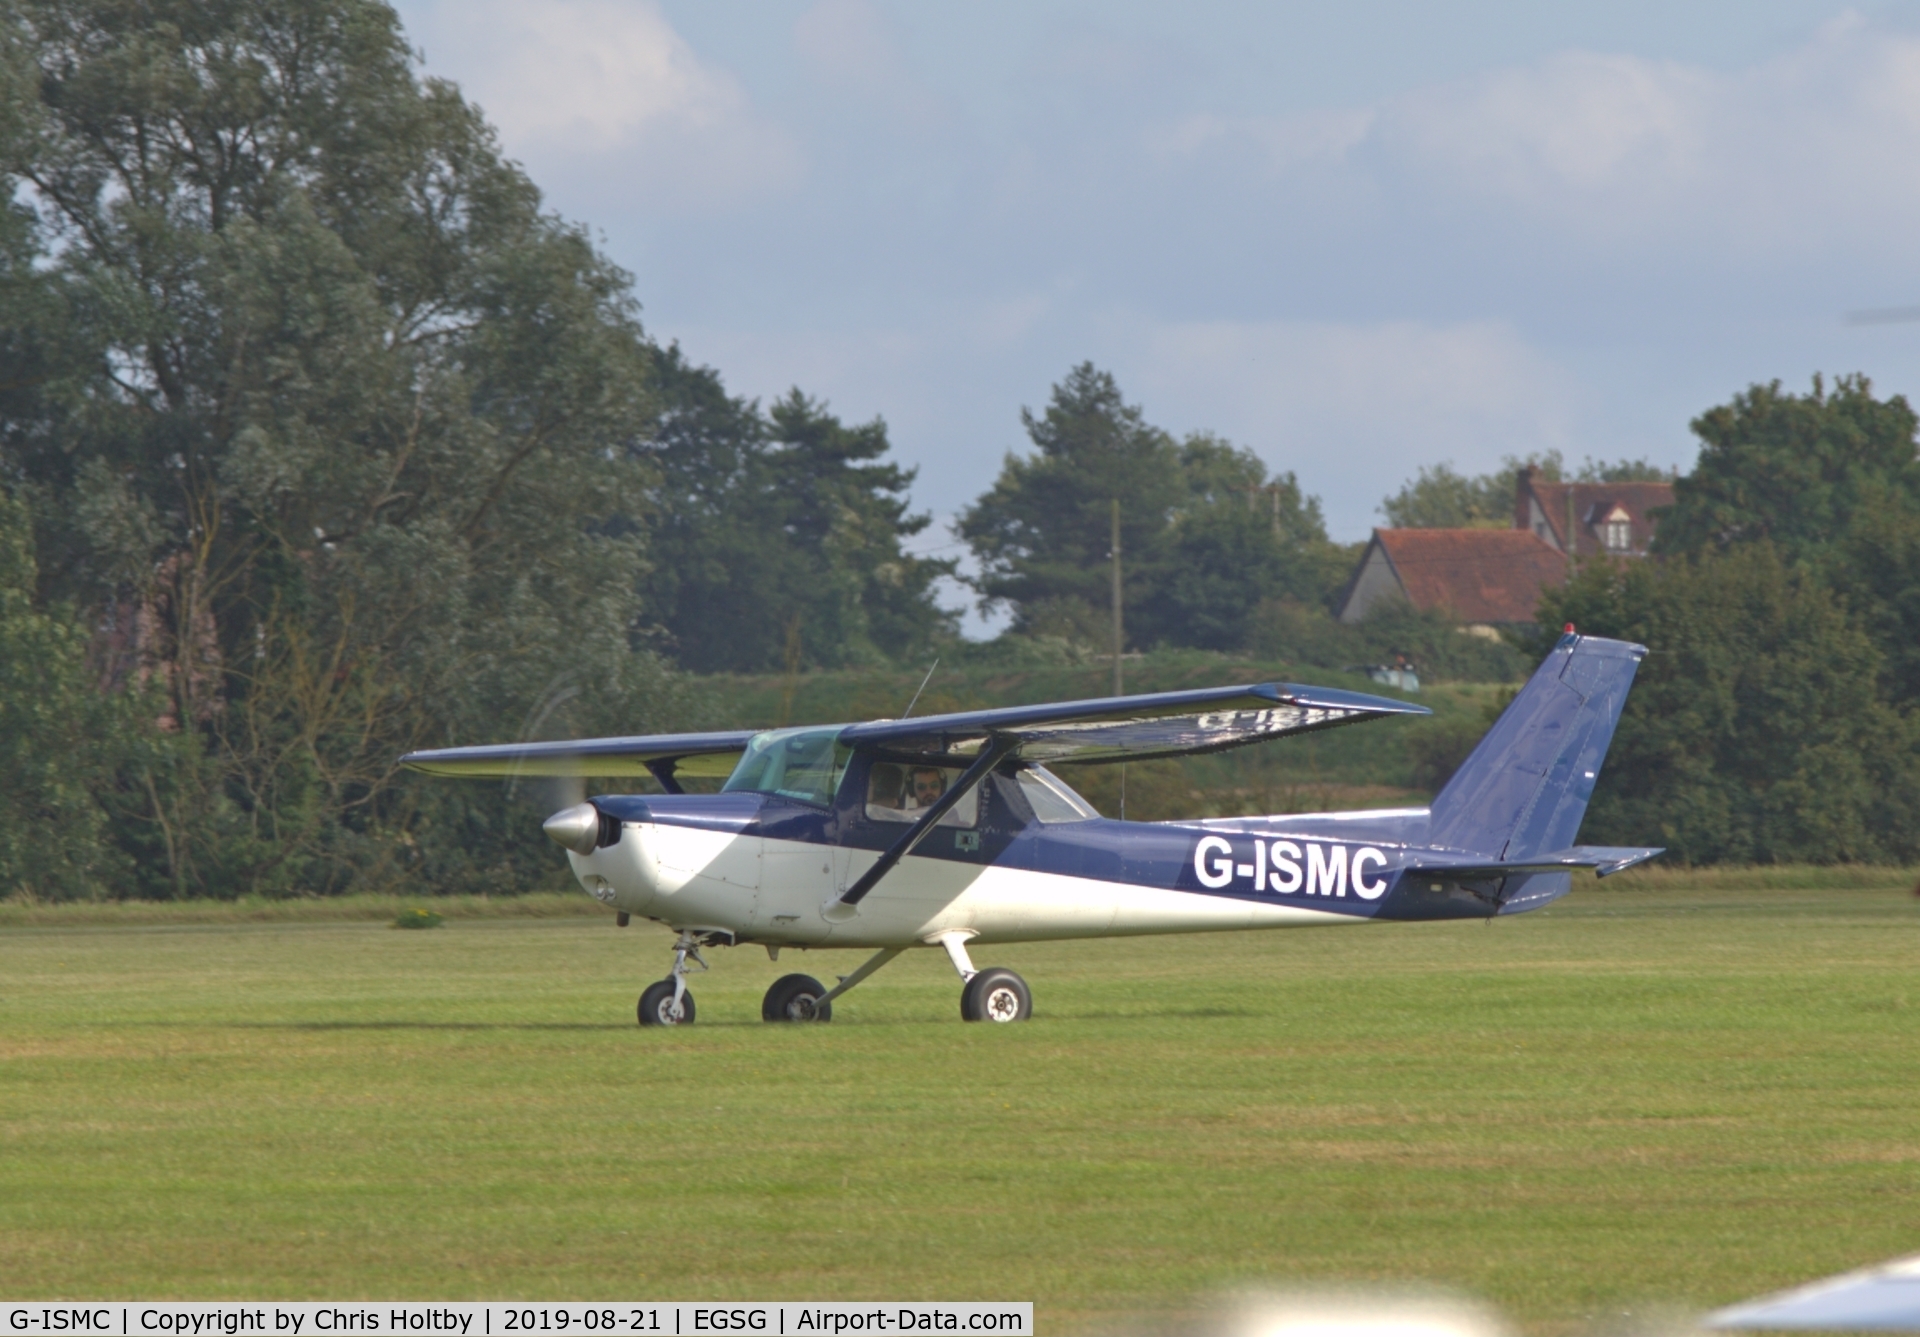 G-ISMC, 1978 Reims F152 C/N 15201468, Taxiing to park at Stapleford Tawney